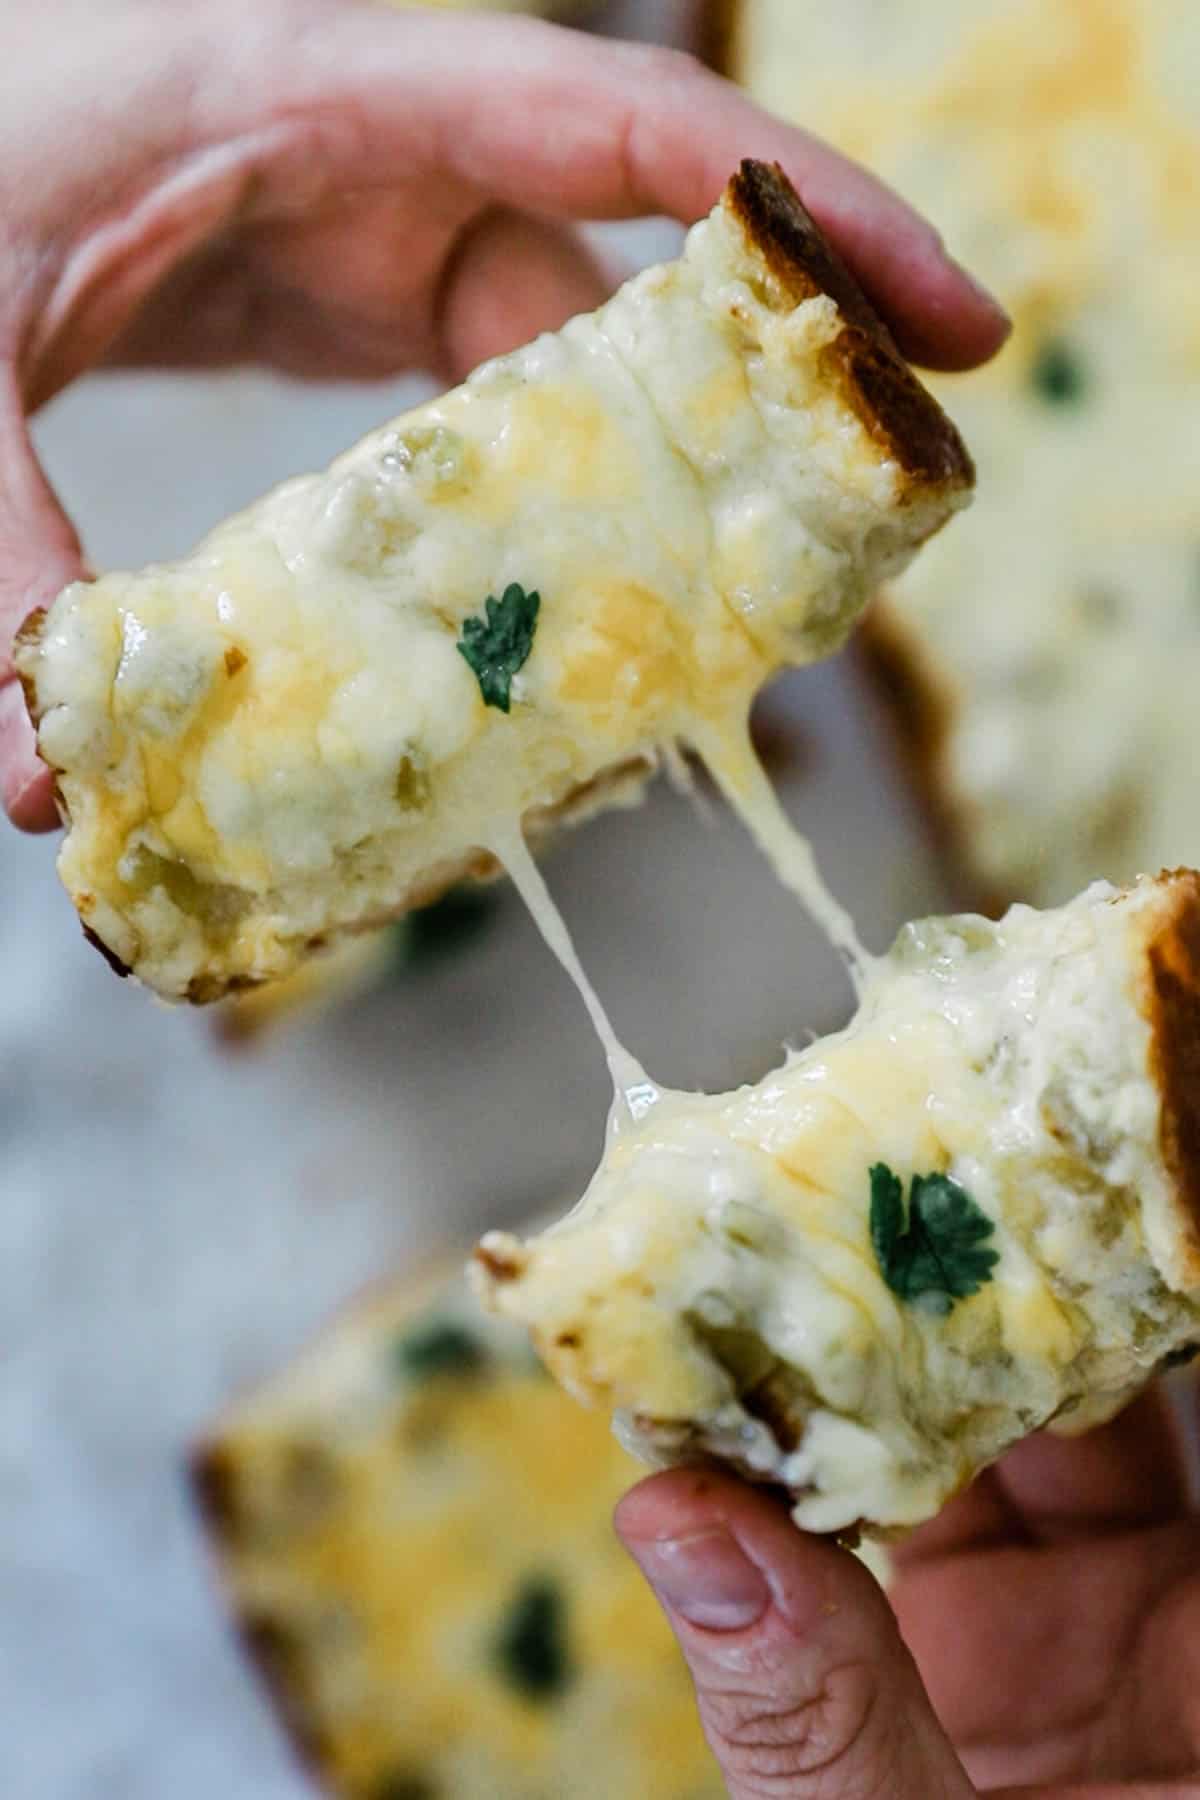 Green chilli cheese toast being pulled apart with cheese strings between slices.